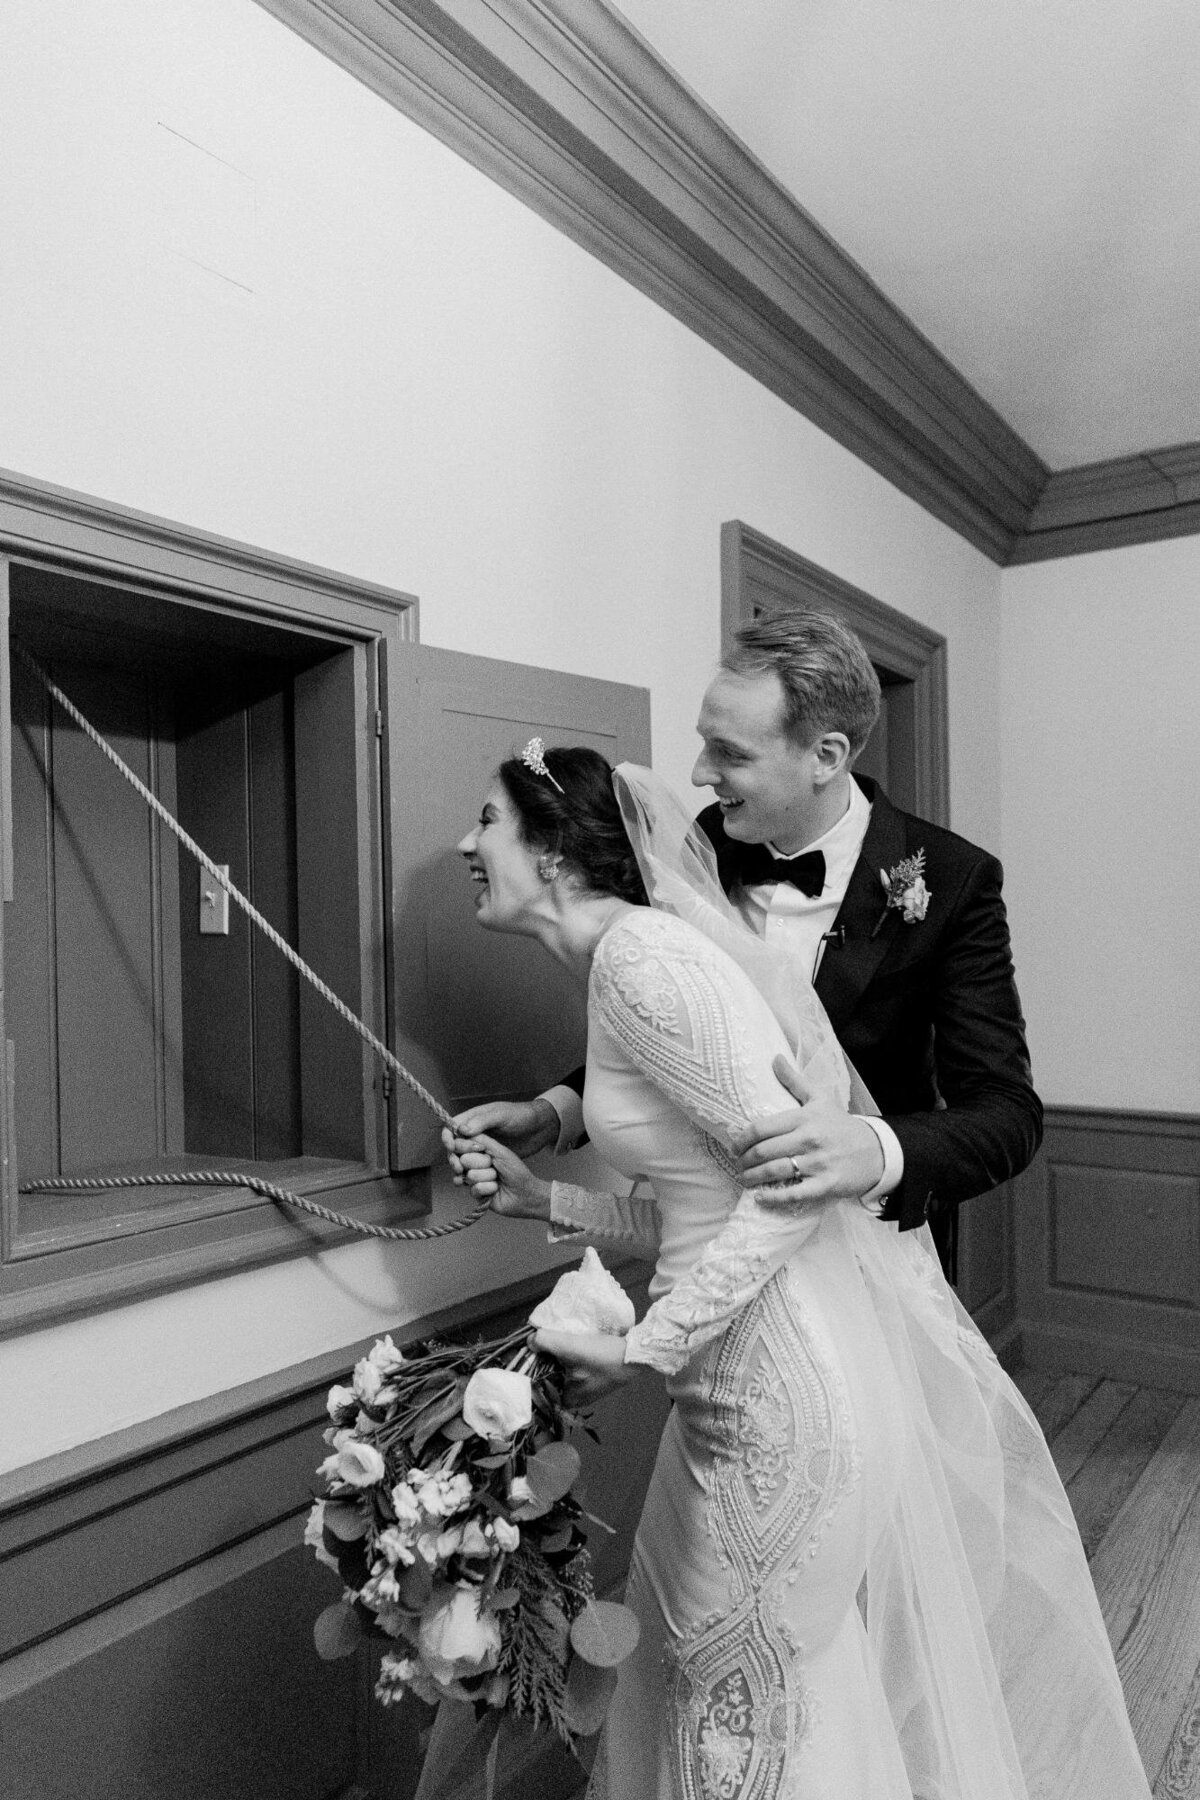 Bride and groom playfully tug on a window blind cord together in a black and white photograph.